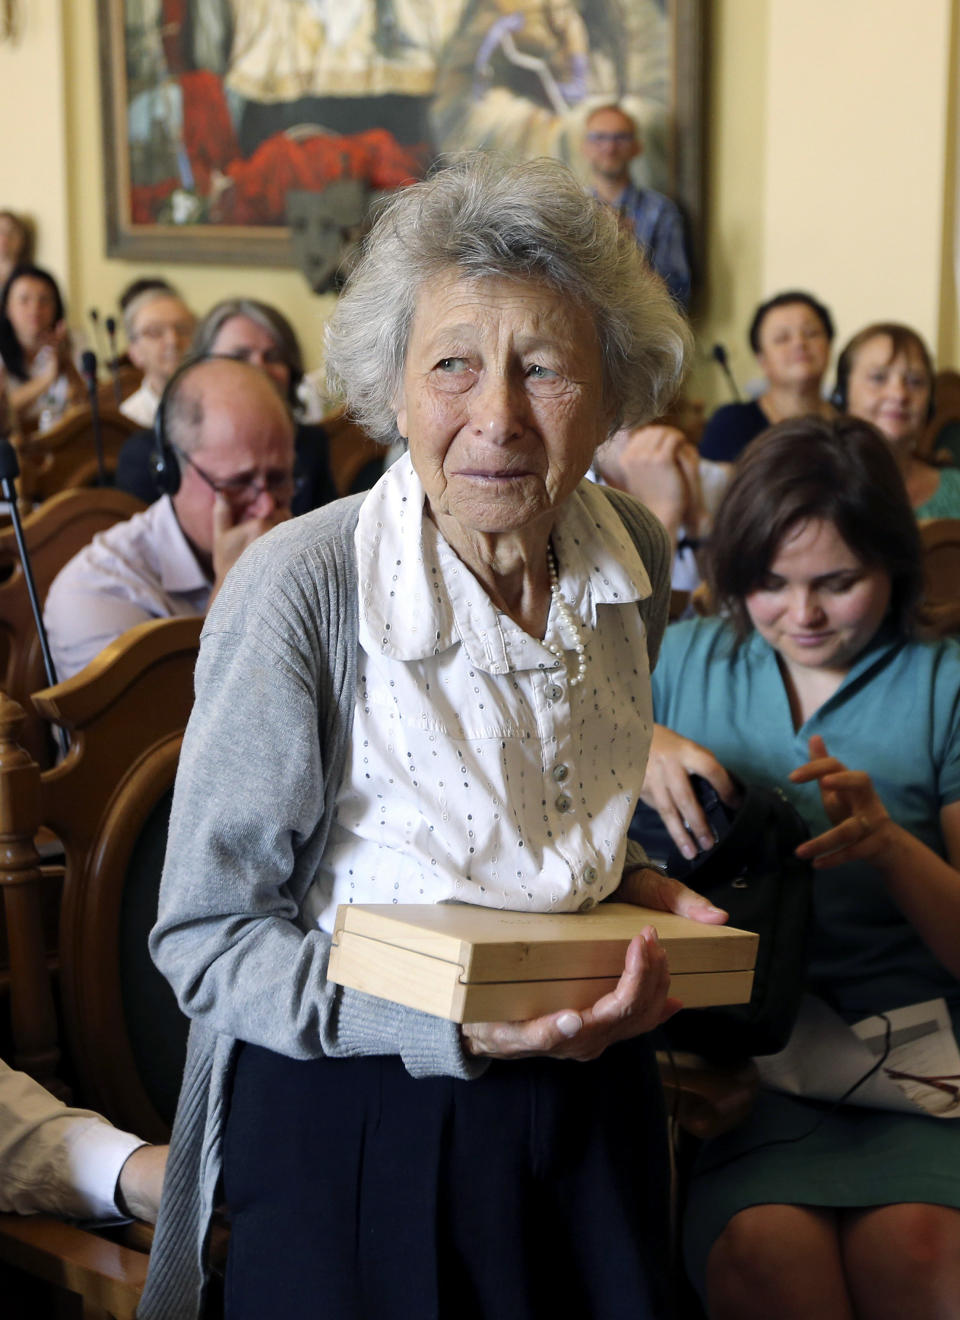 Yanina Hescheles, Polish writer and a Nazi concentration camp survivor, holds a glass copy of an old metal synagogue key at a ceremony commemorating the 75th anniversary of the annihilation of the city's Jewish population by Nazi Germany in Lviv, Ukraine, Sunday, Sept. 2, 2018. The Ukrainian city of Lviv, once a major center of Jewish life in Eastern Europe, is commemorating the 75th anniversary of the annihilation of the city's Jewish population by Nazi Germany and honoring those working today to preserve that vanished world. The commemoration comes amid a larger attempt in Ukraine to preserve the memories of the prewar Jewish community. (AP Photo/Yevheniy Kravs)